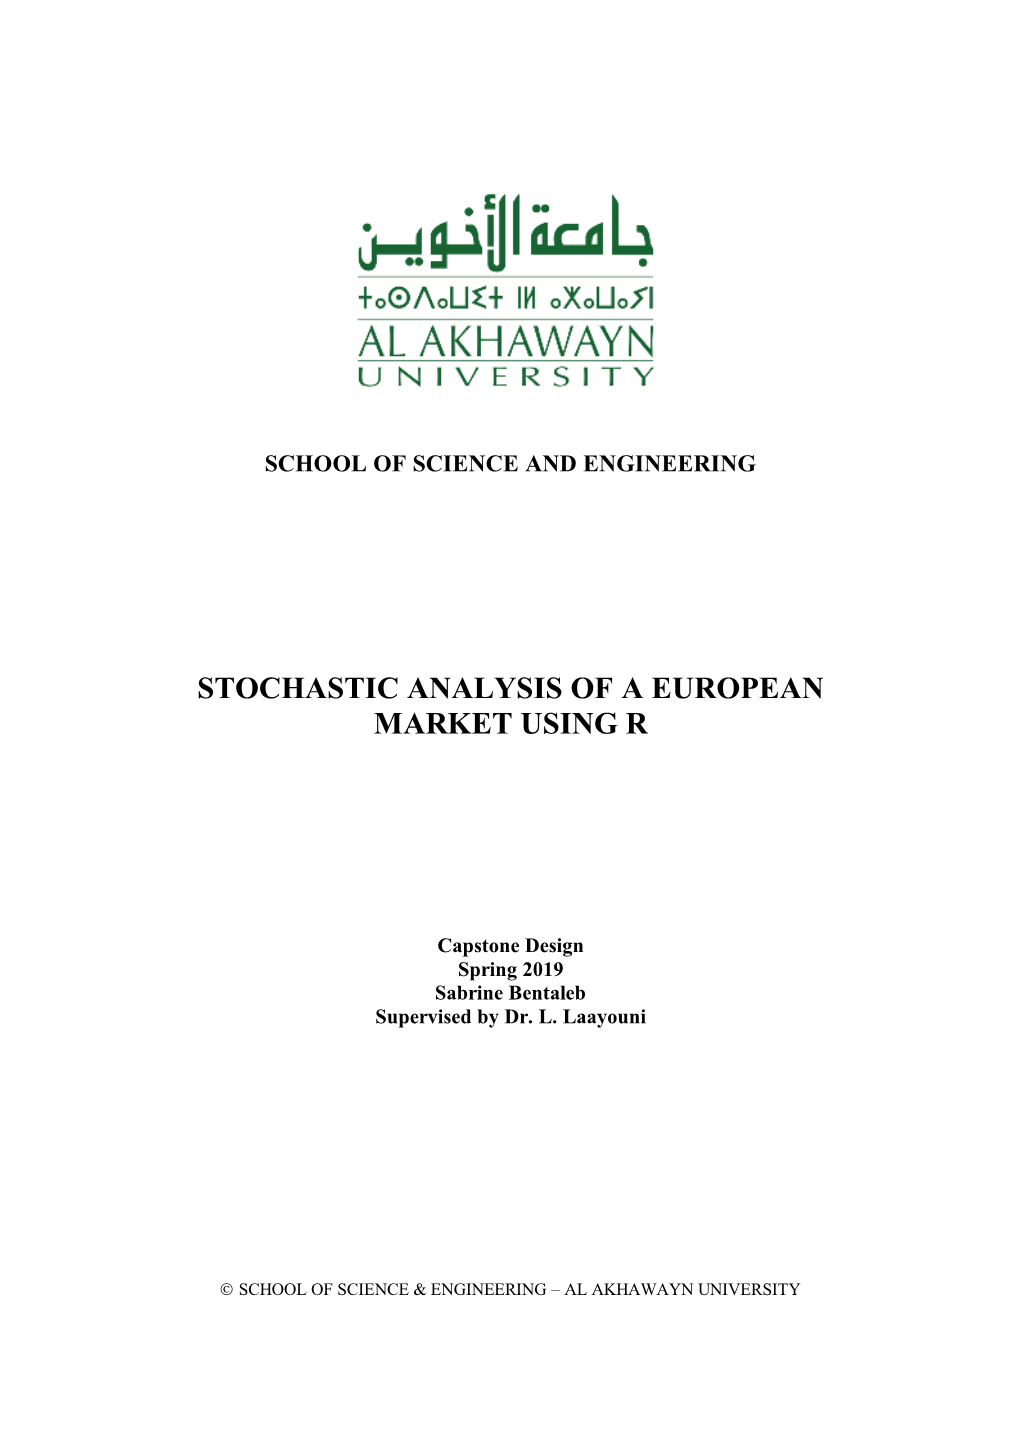 Stochastic Analysis of a European Market Using R